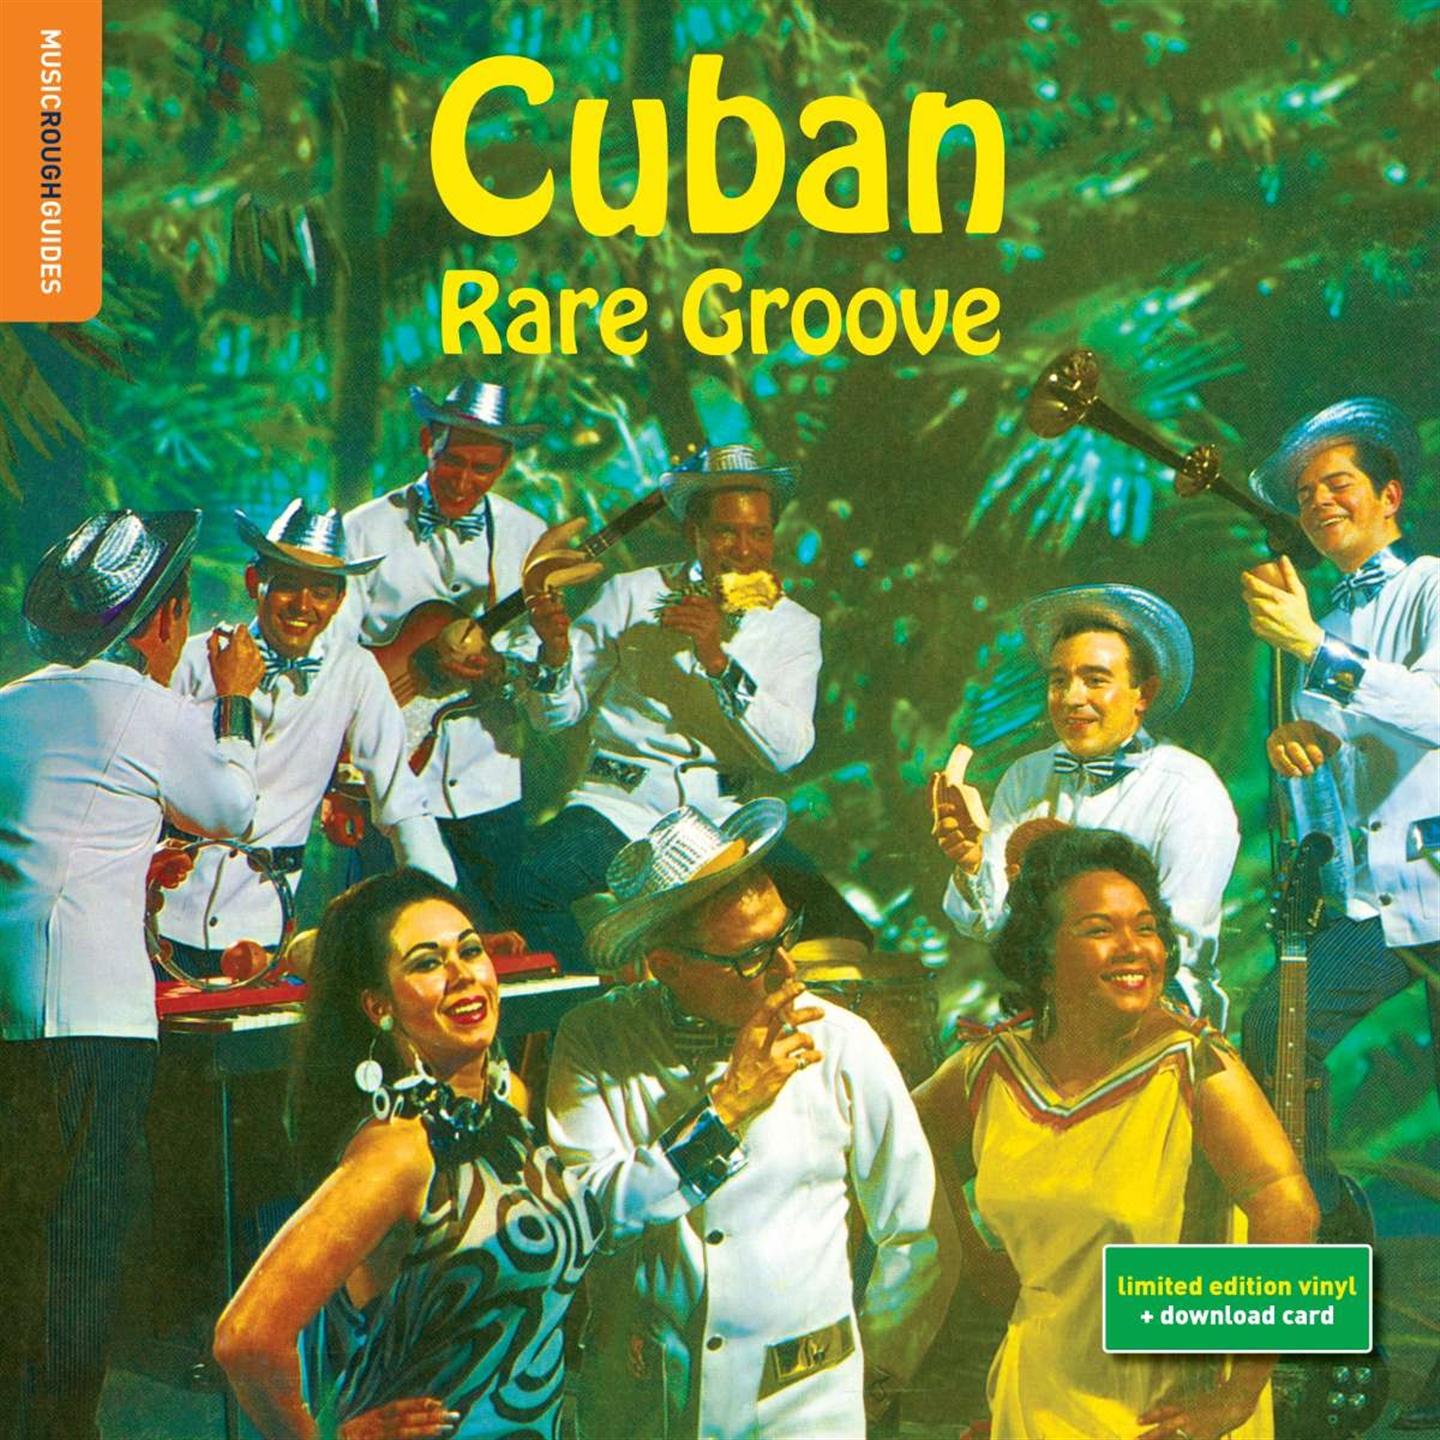 THE ROUGH GUIDE TO CUBAN RARE GROOVE